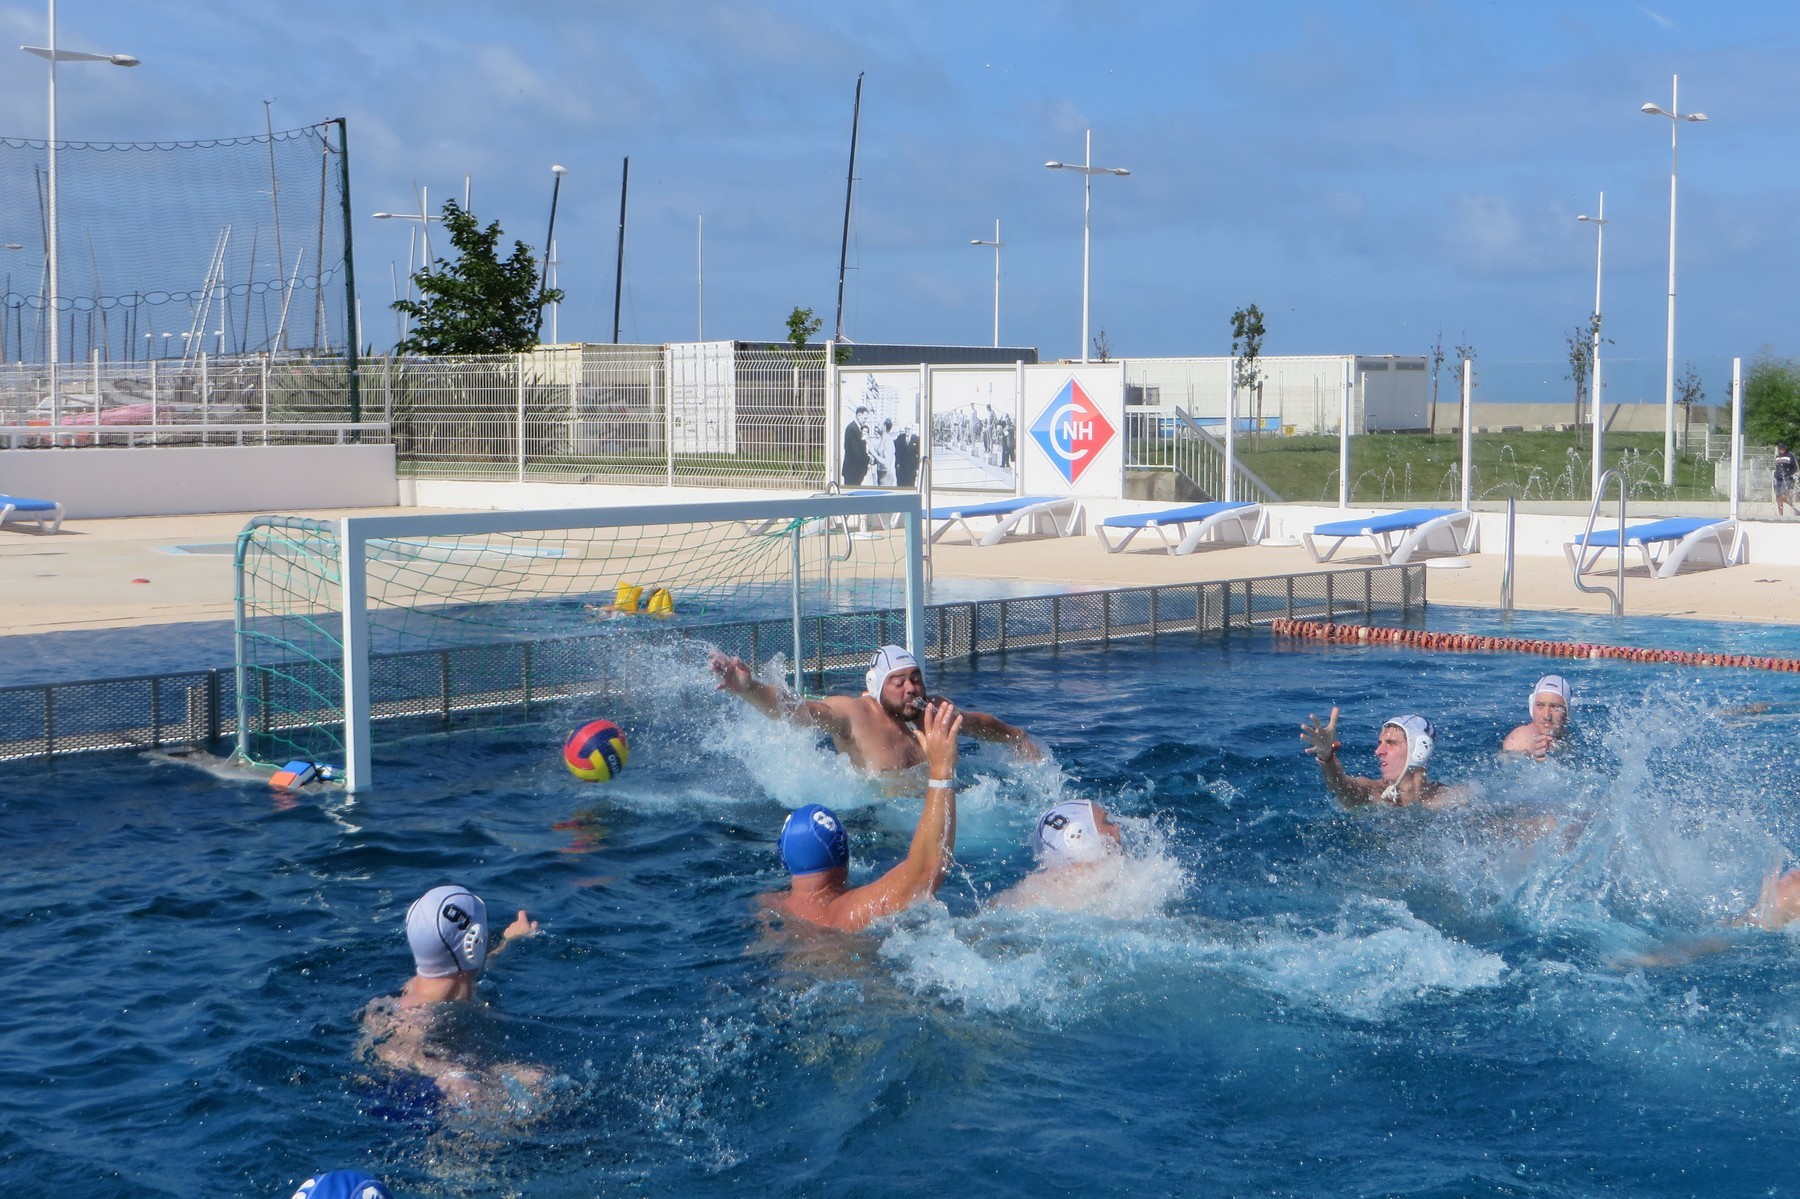 Water polo CN Le Havre